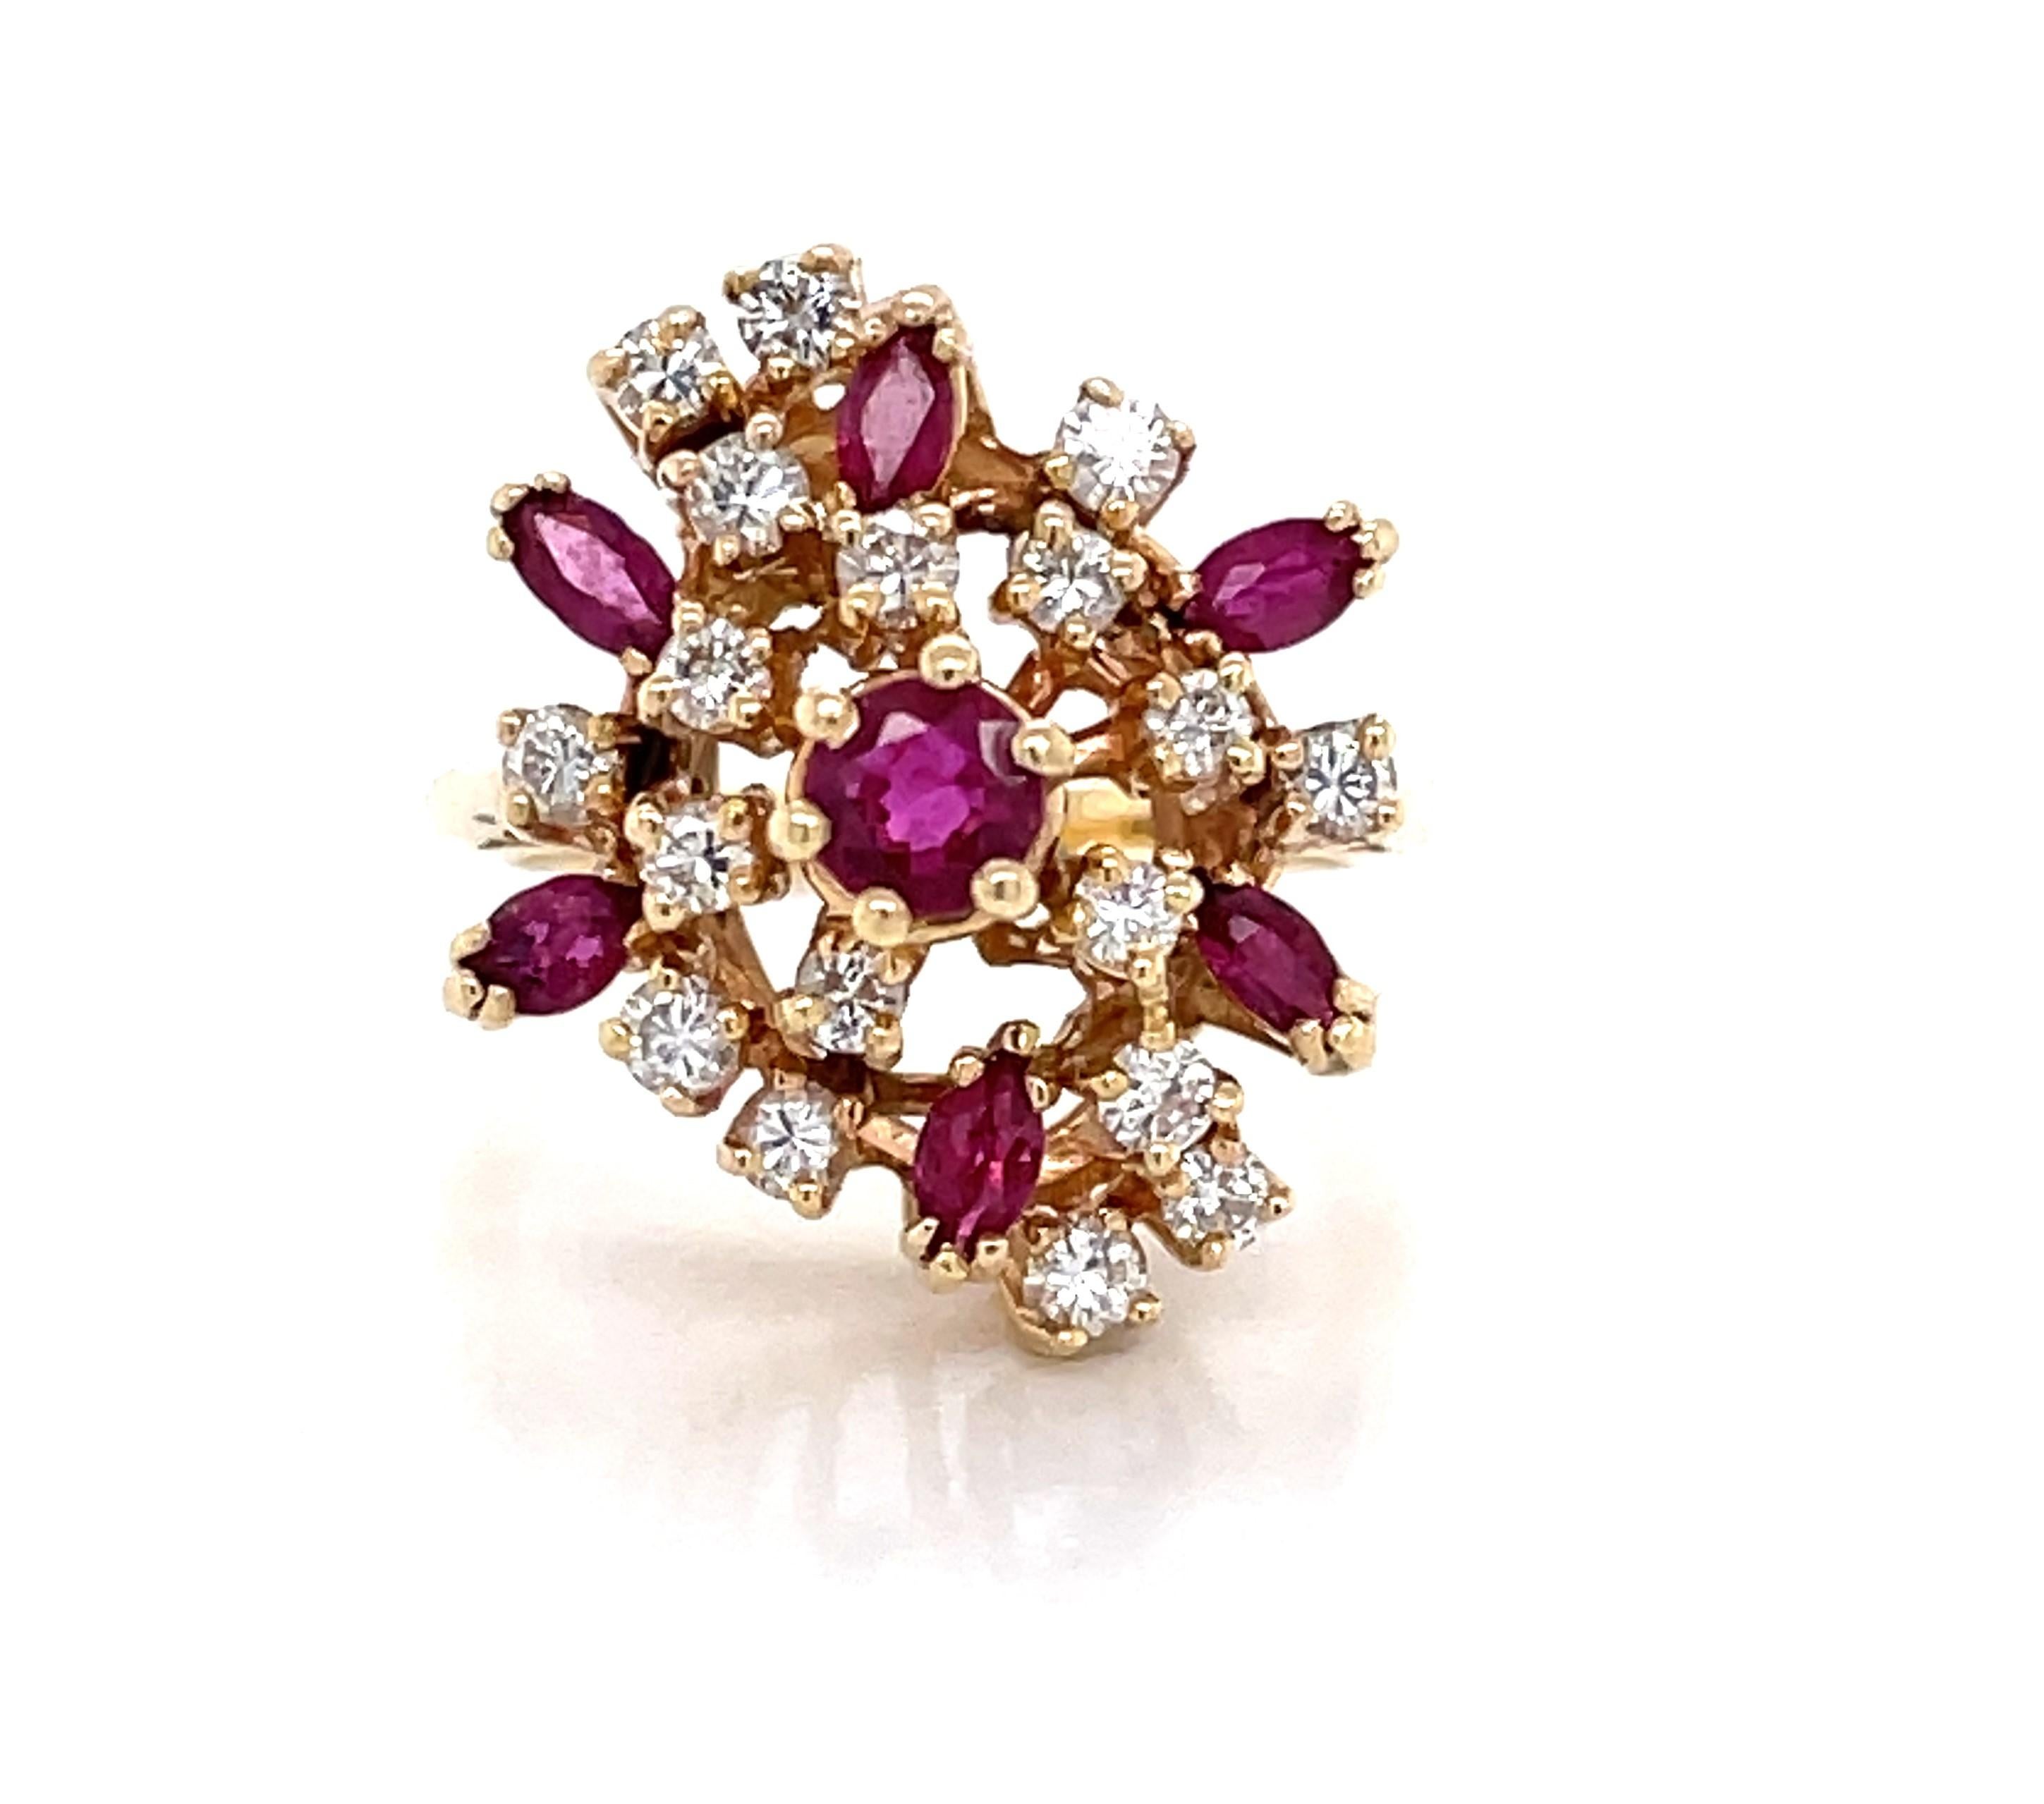 Bright and elegant with added flair this ring is set asymmetrical with a sparkling cluster arrangement of rubies and diamonds each prong set and graduating towards a larger center ruby gemstone. The glistening floral burst is is comprised of seven